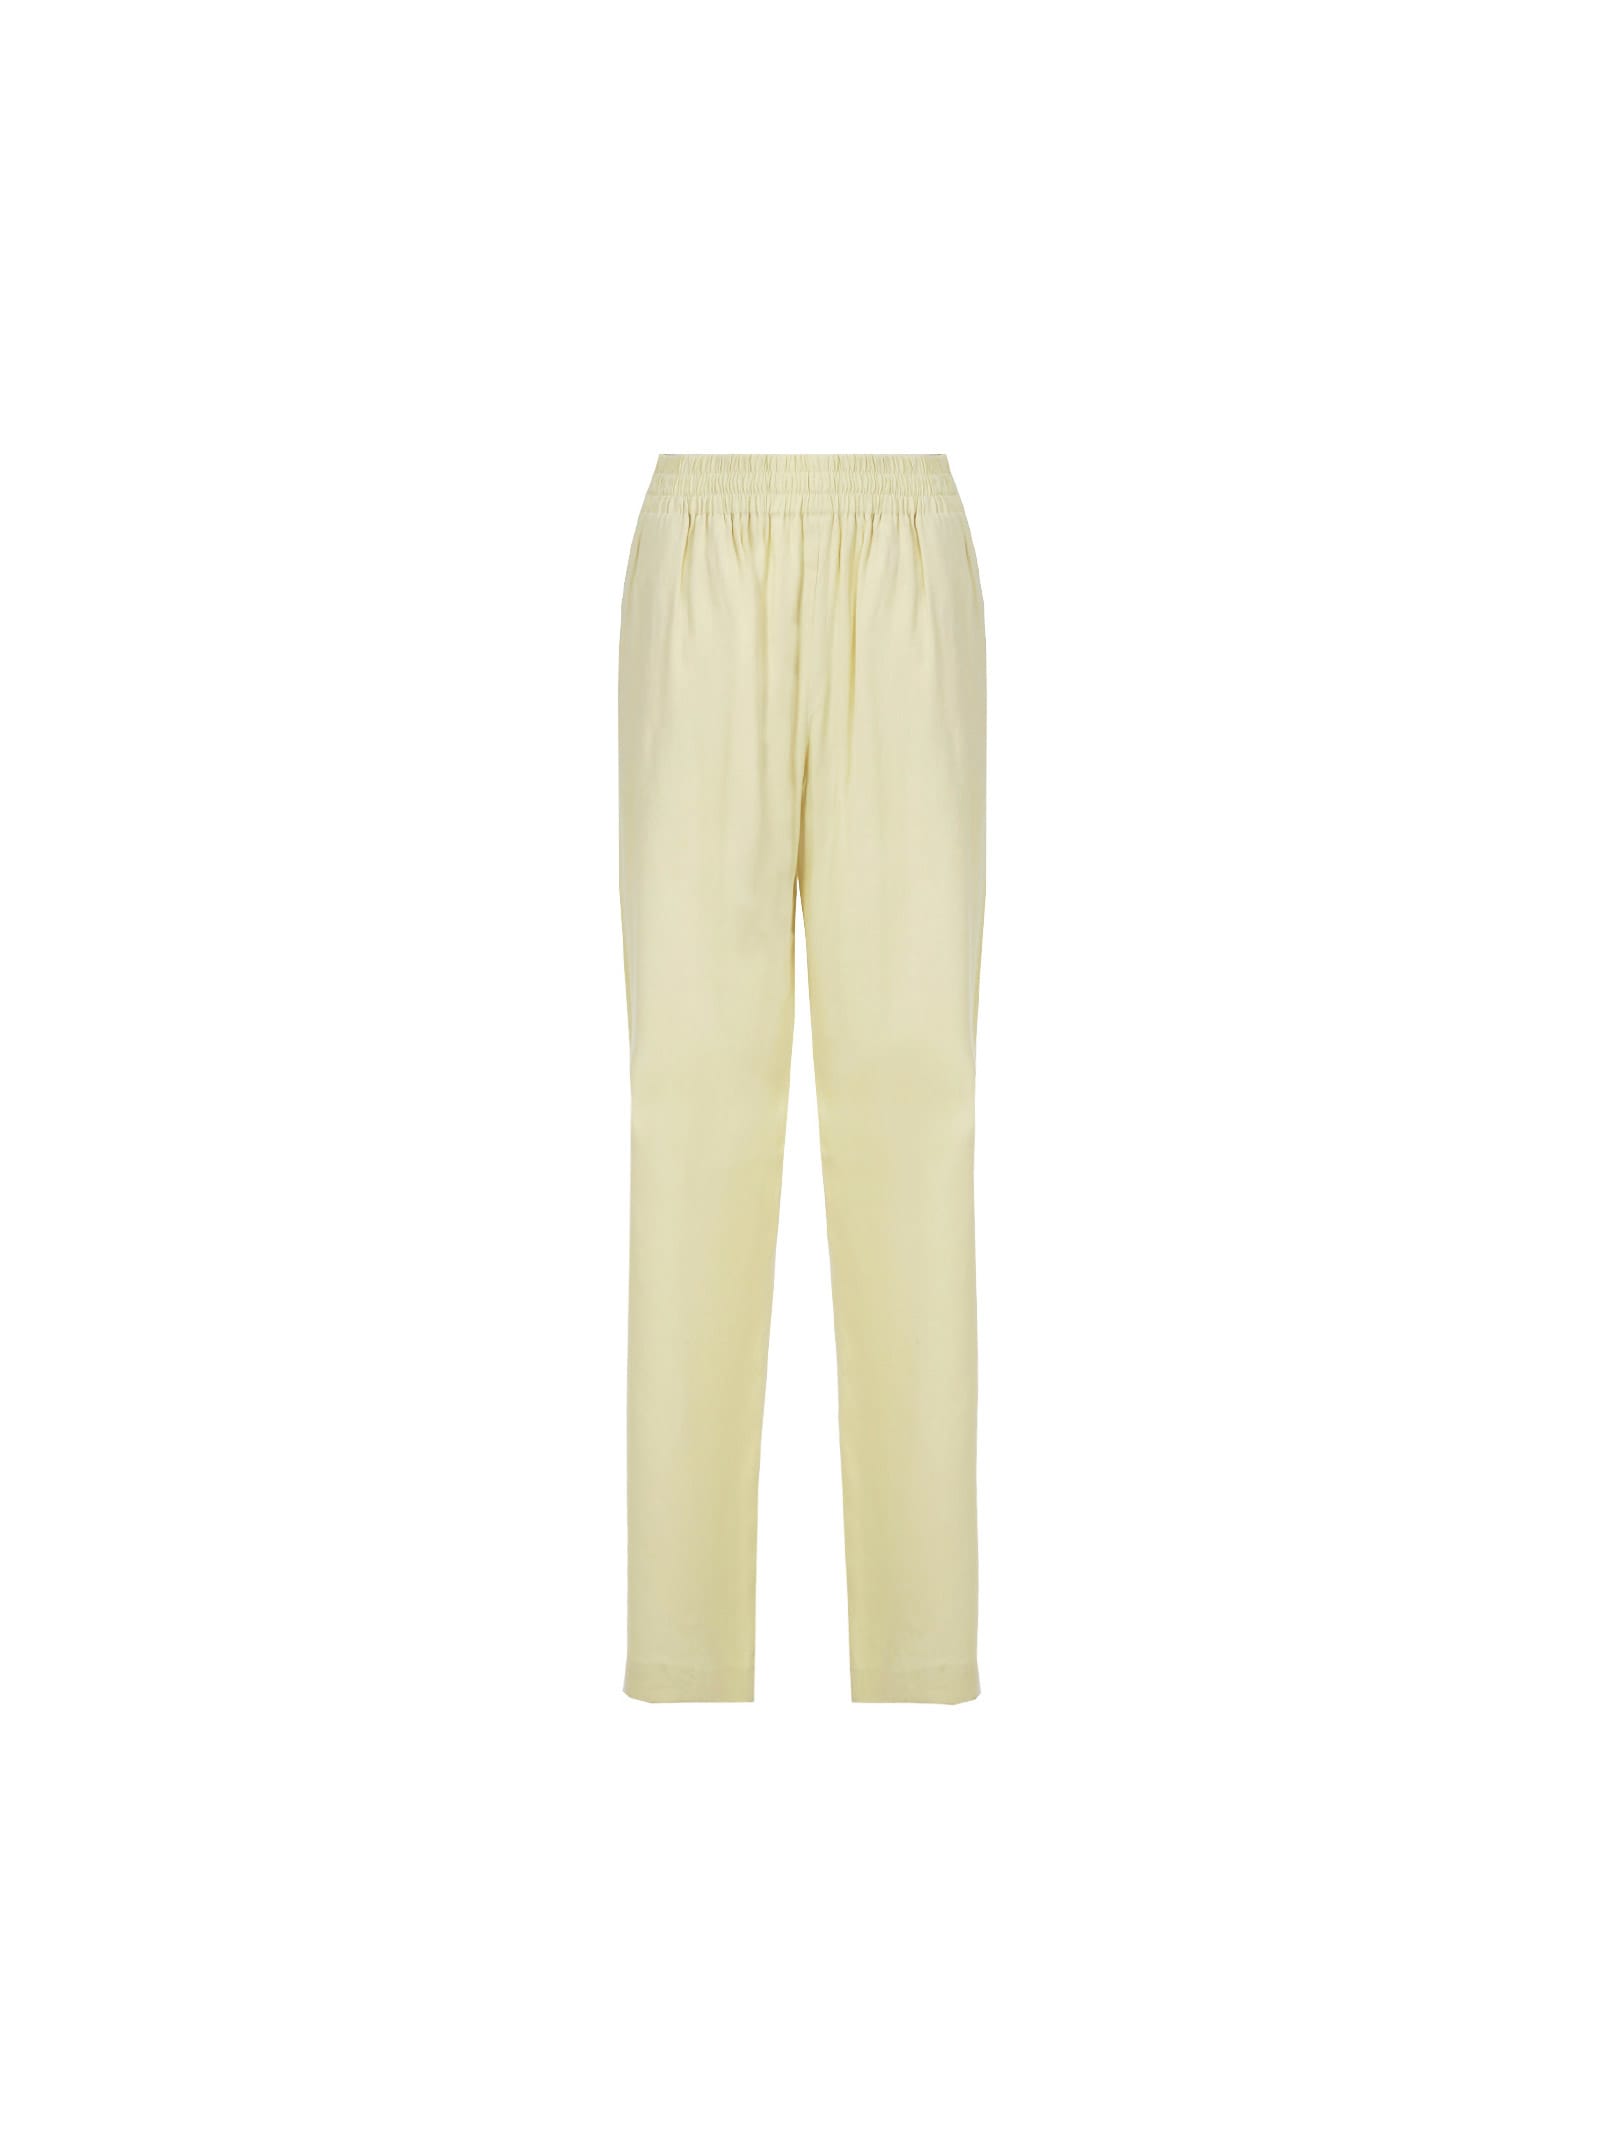 Golden Goose Brittany Pajamas Pant